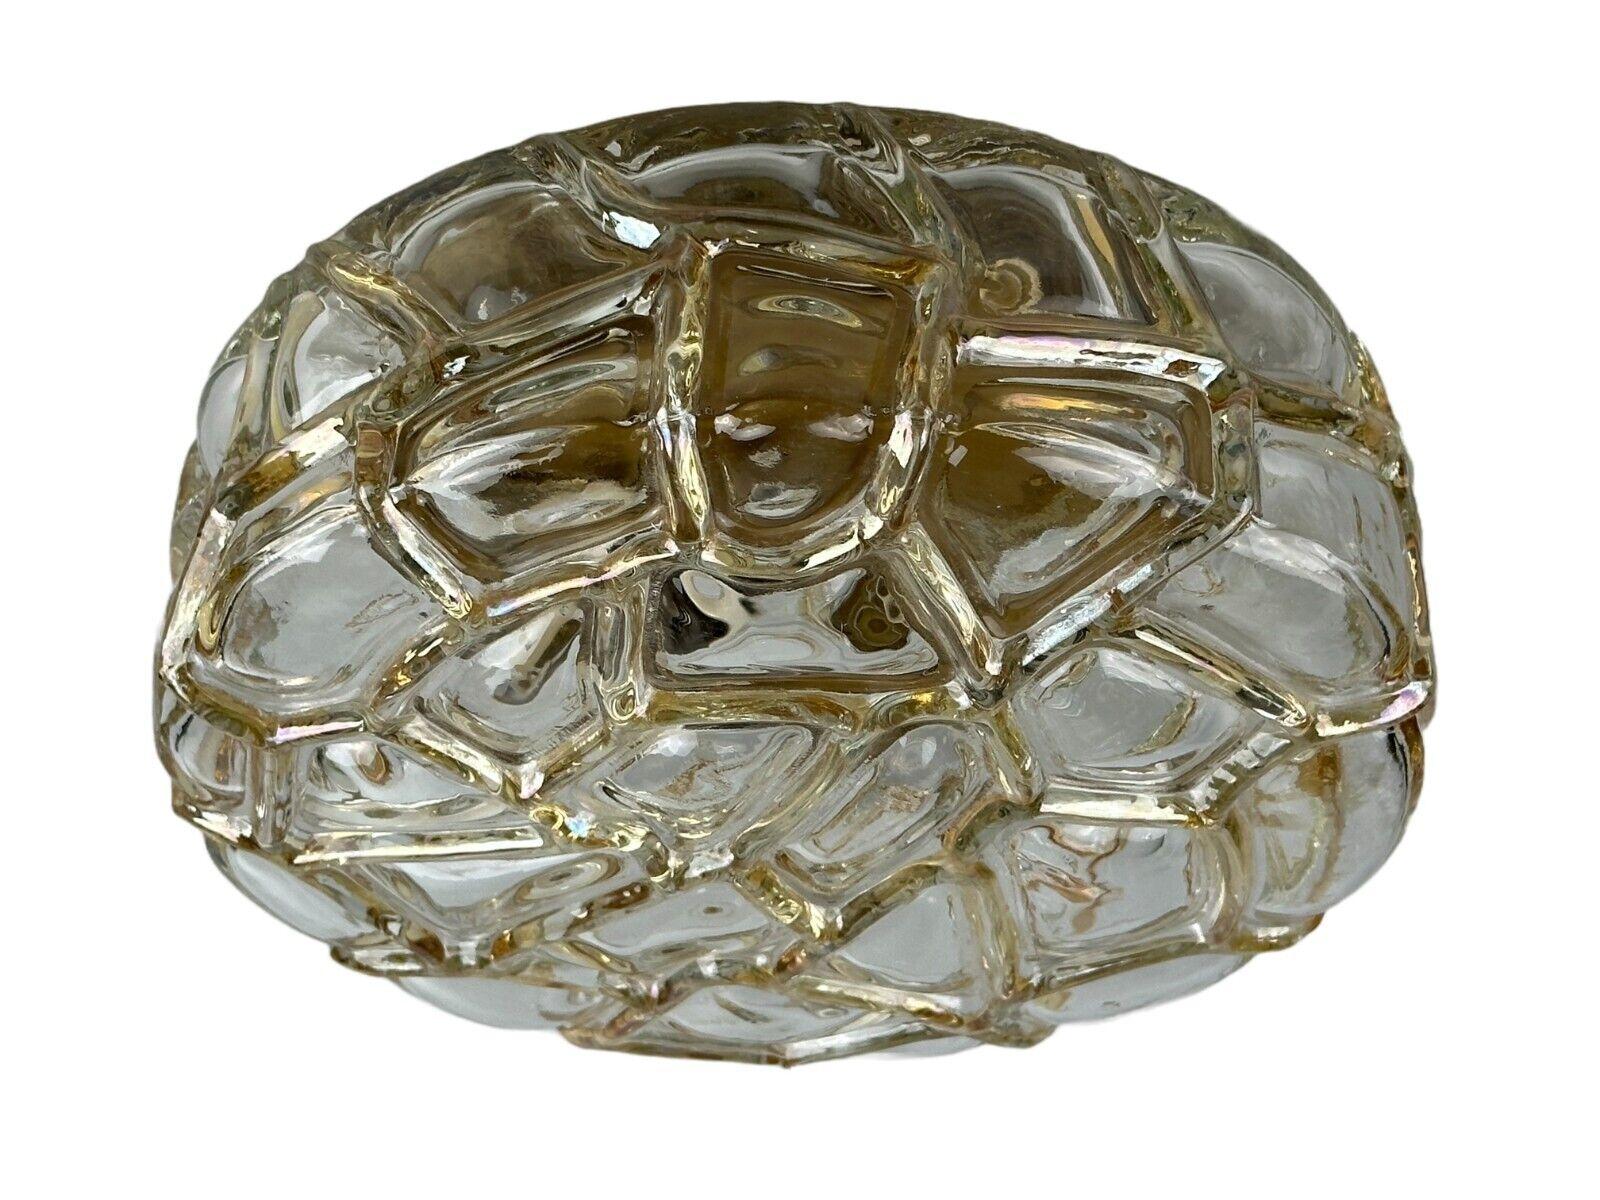 60s 70s ceiling lamp or wall lamp Bubble Glass Germany Space Age Design

Object: ceiling lamp

Manufacturer:

Condition: good

Age: around 1960-1970

Dimensions:

Diameter = 25.5cm
Height = 11cm

Dimensions: glass, metal

Other notes:

E27